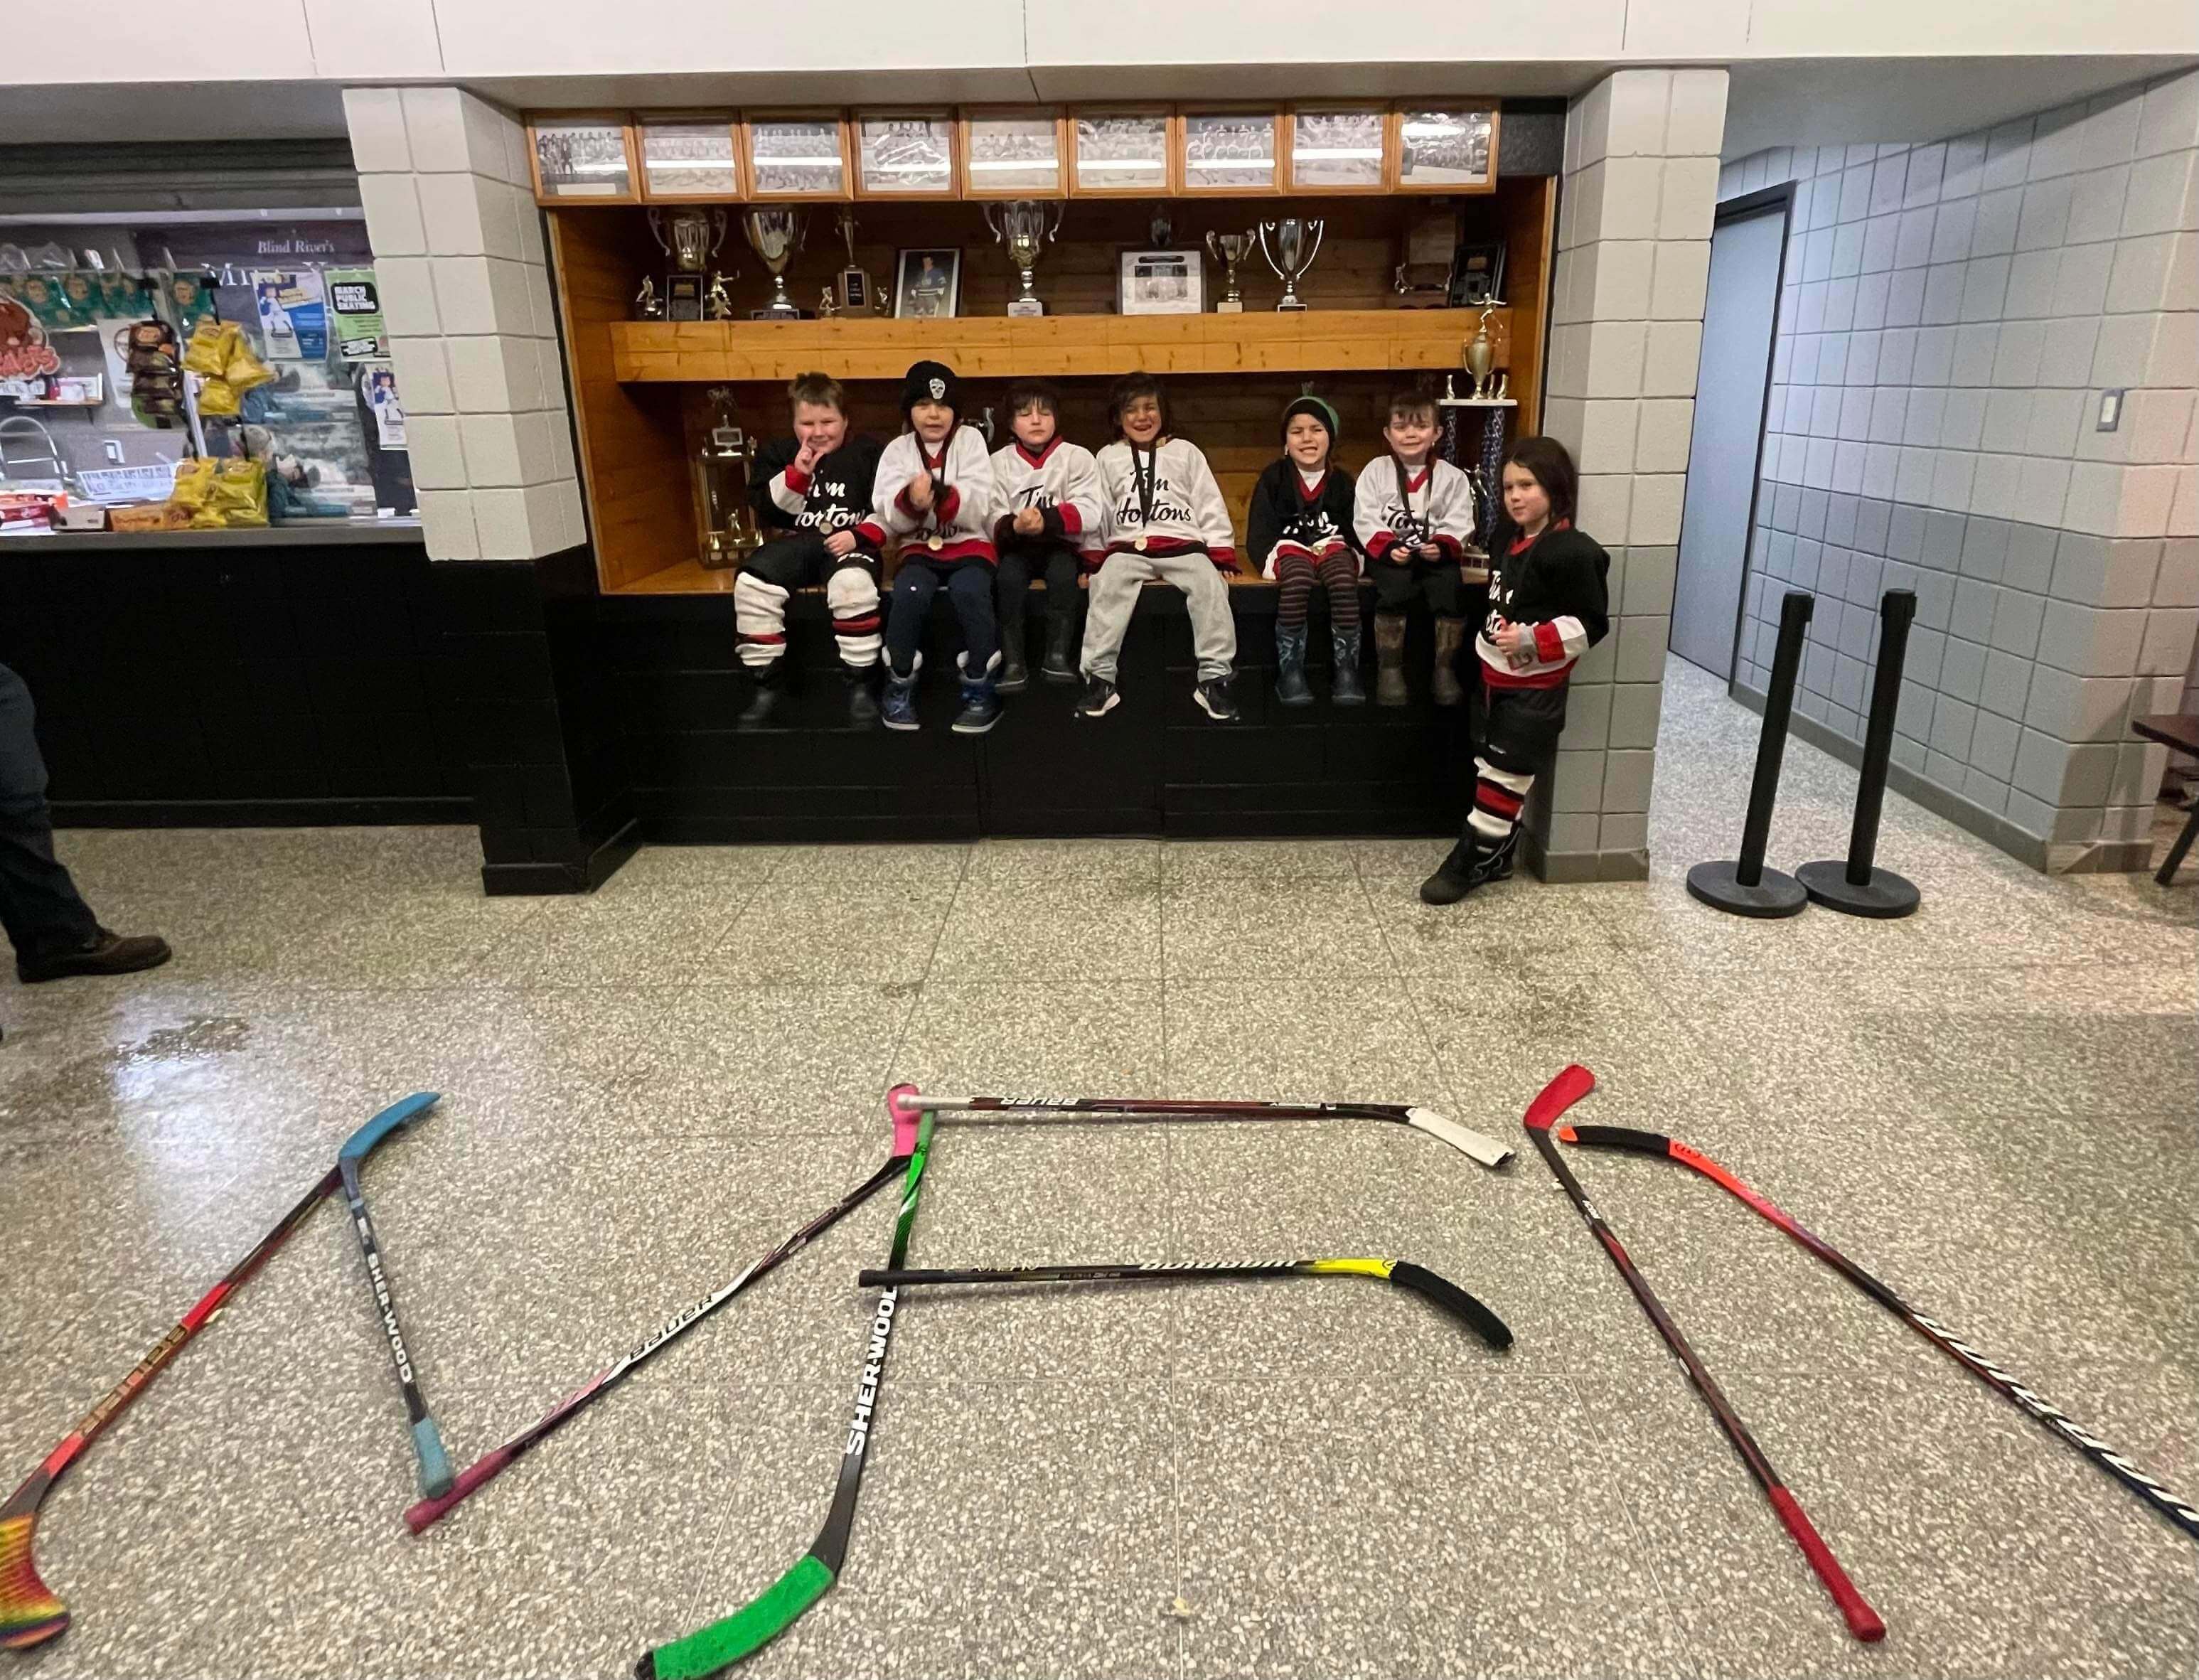 photo of hockey sticks from the 2023 Little NHL Social Media contest